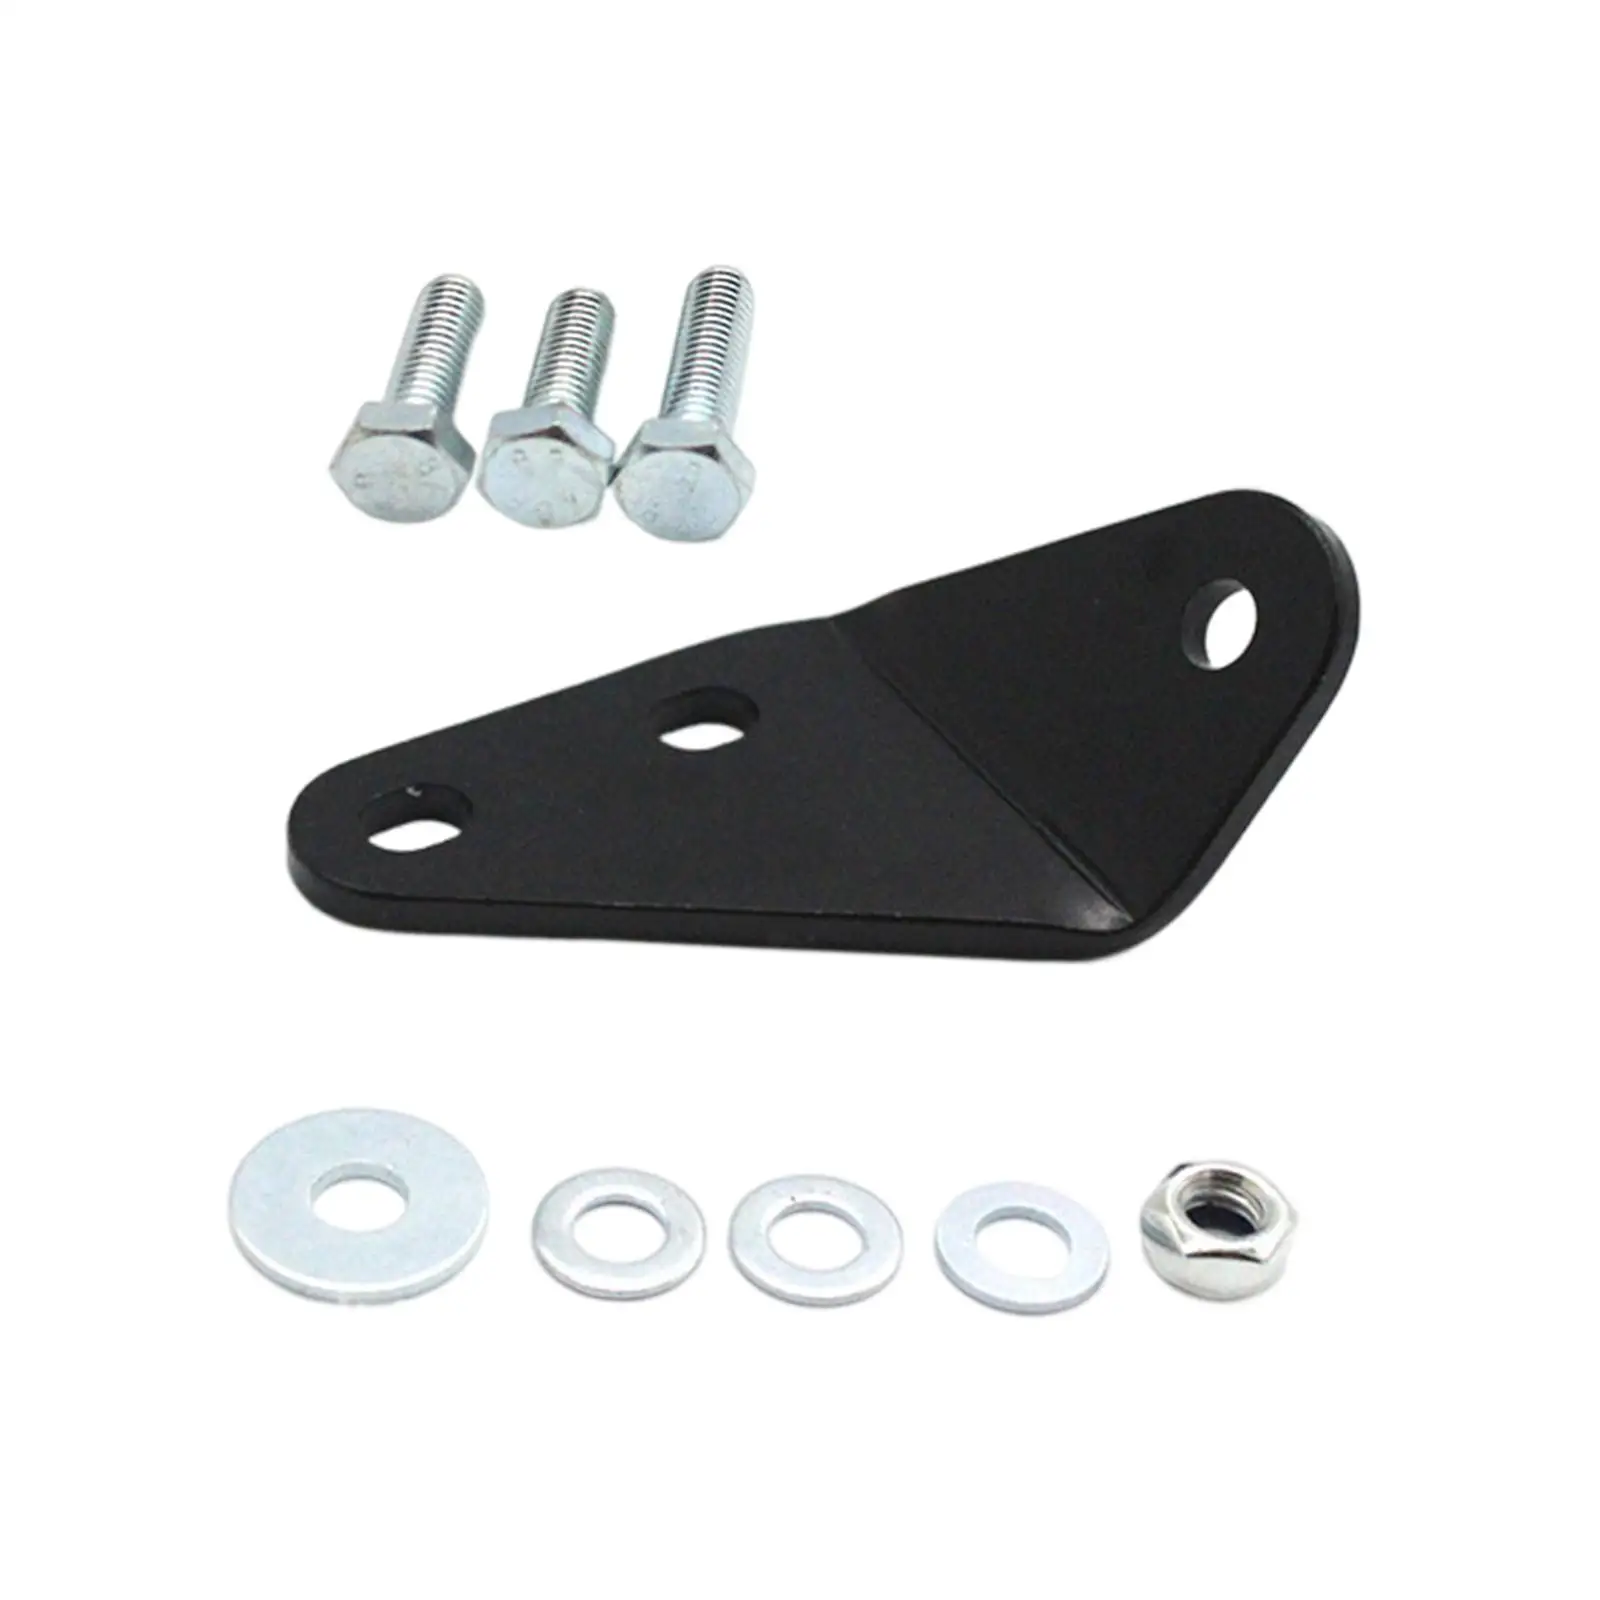 Clutch Pedal Repair Bracket Kit Easy Installation Replace Durable for Volkswagen T4 Transporter Caravelle Accessories